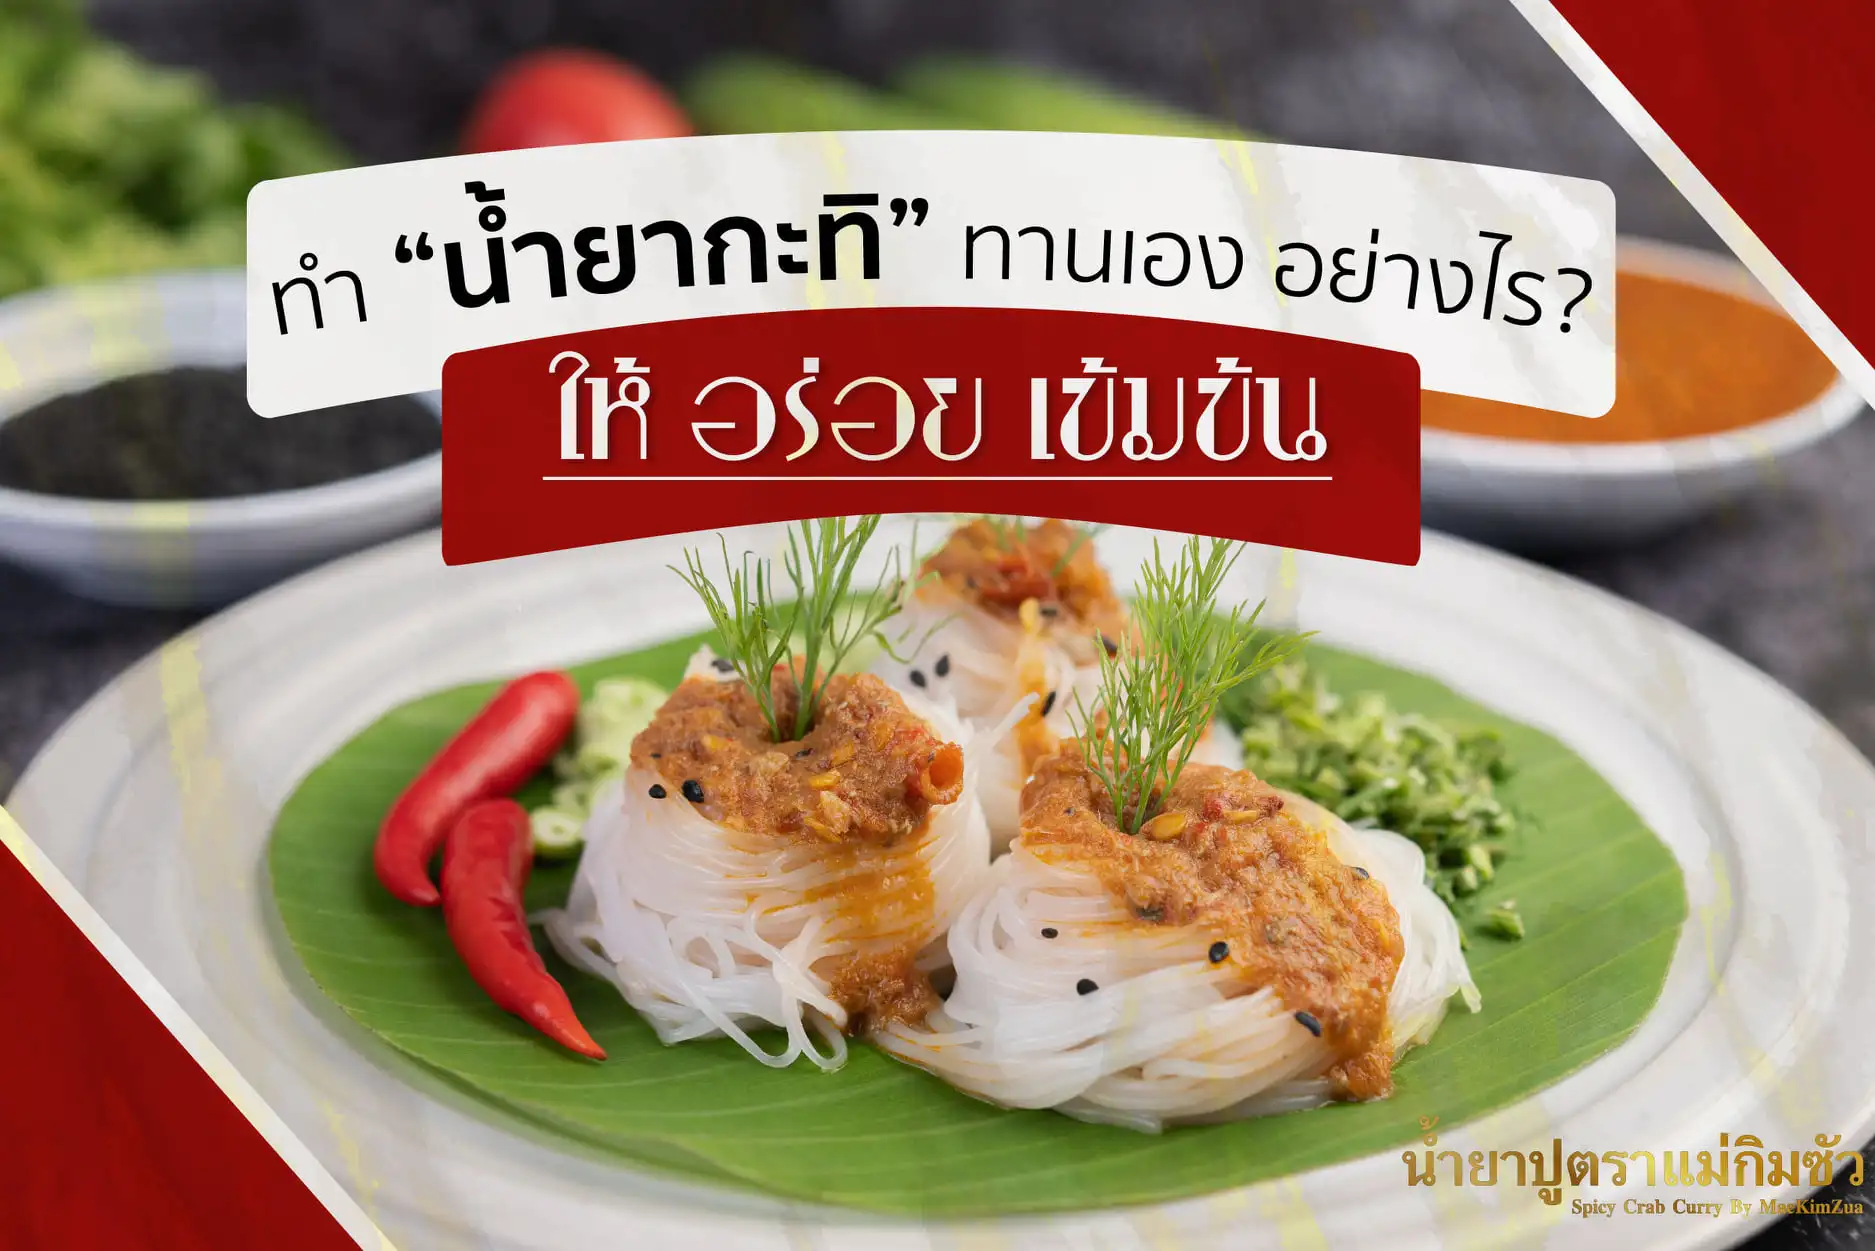 Spicy Crab Curry Band Mae-Kim-Zua Ready to Eat Premium Instant Food Products from Thailand